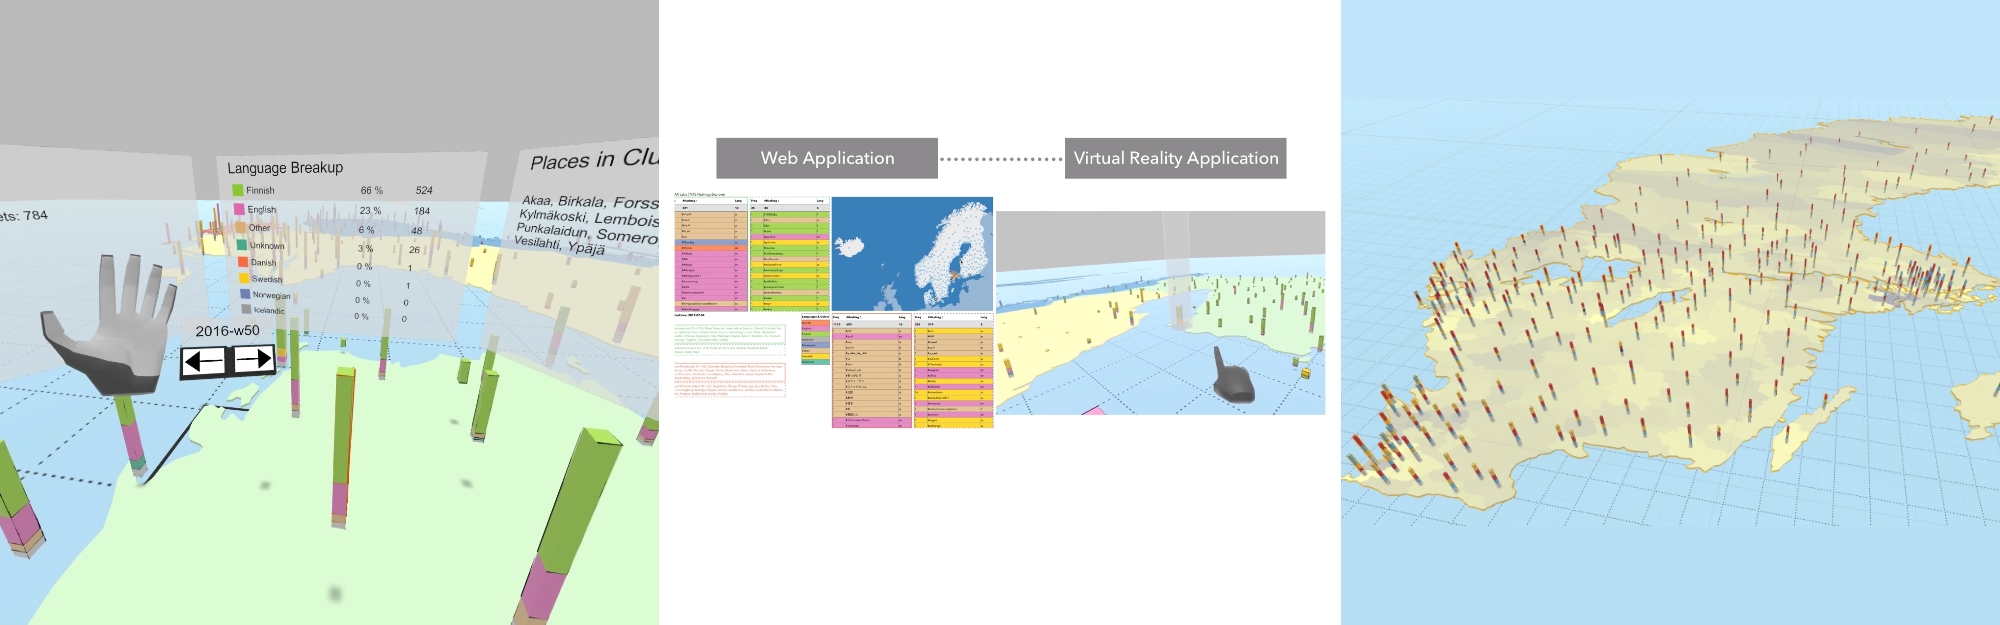 A collage of three images that visually represent the research about Open Data Exploration in Virtual Reality x Nordic Tweet Stream.